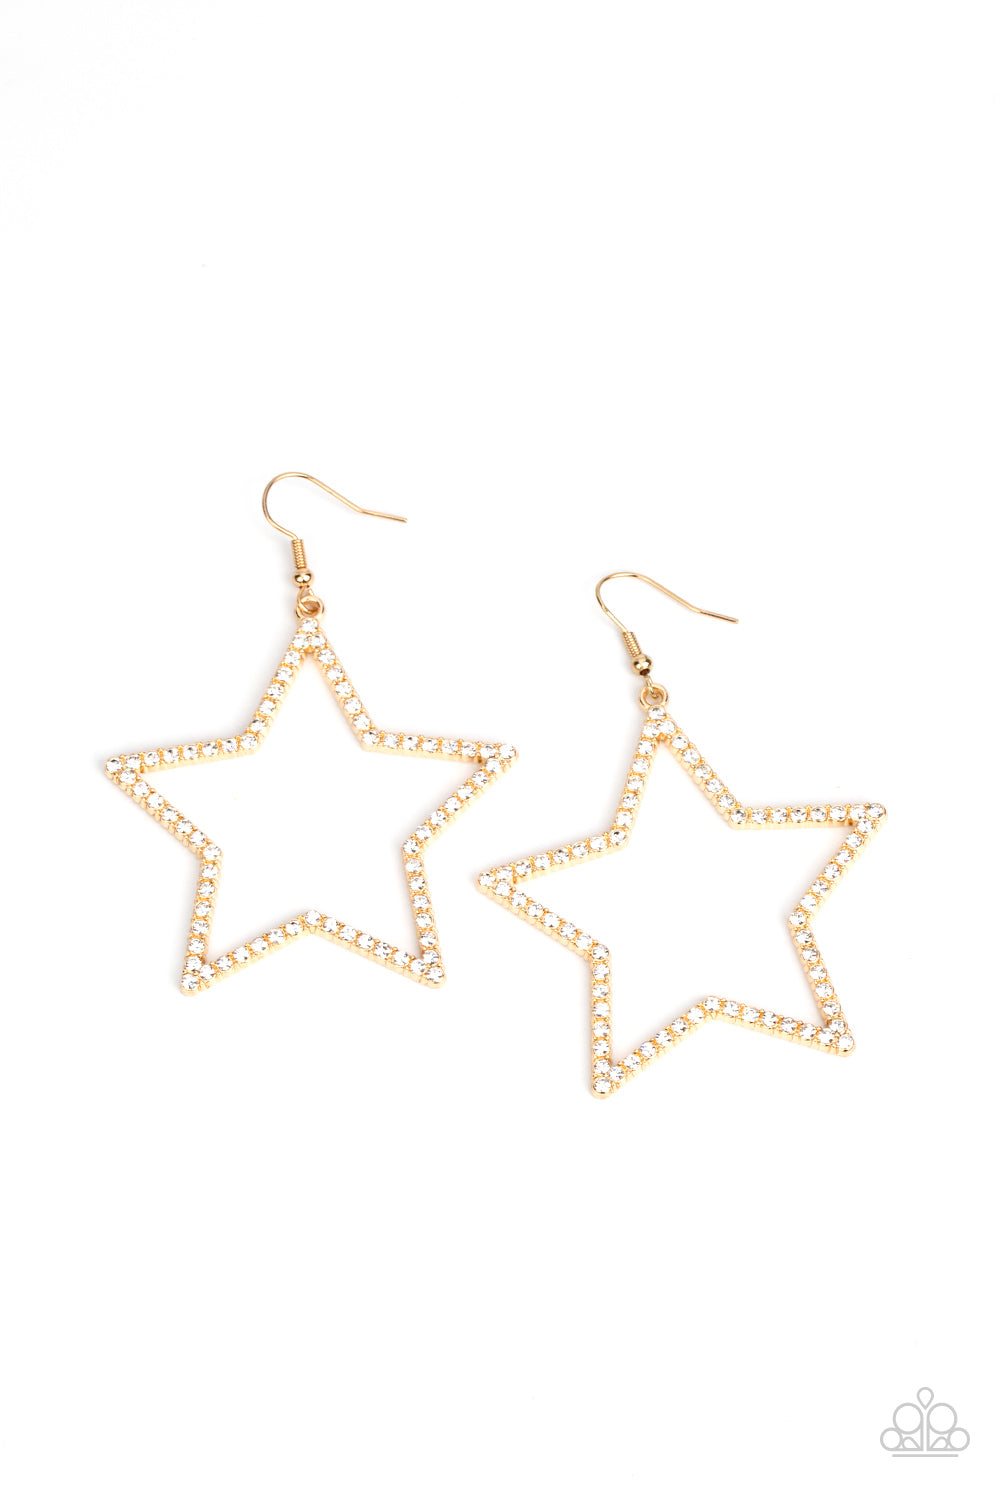 oak-sisters-jewelry-supernova-sparkle-gold-earrings-paparazzi-accessories-by-lisa